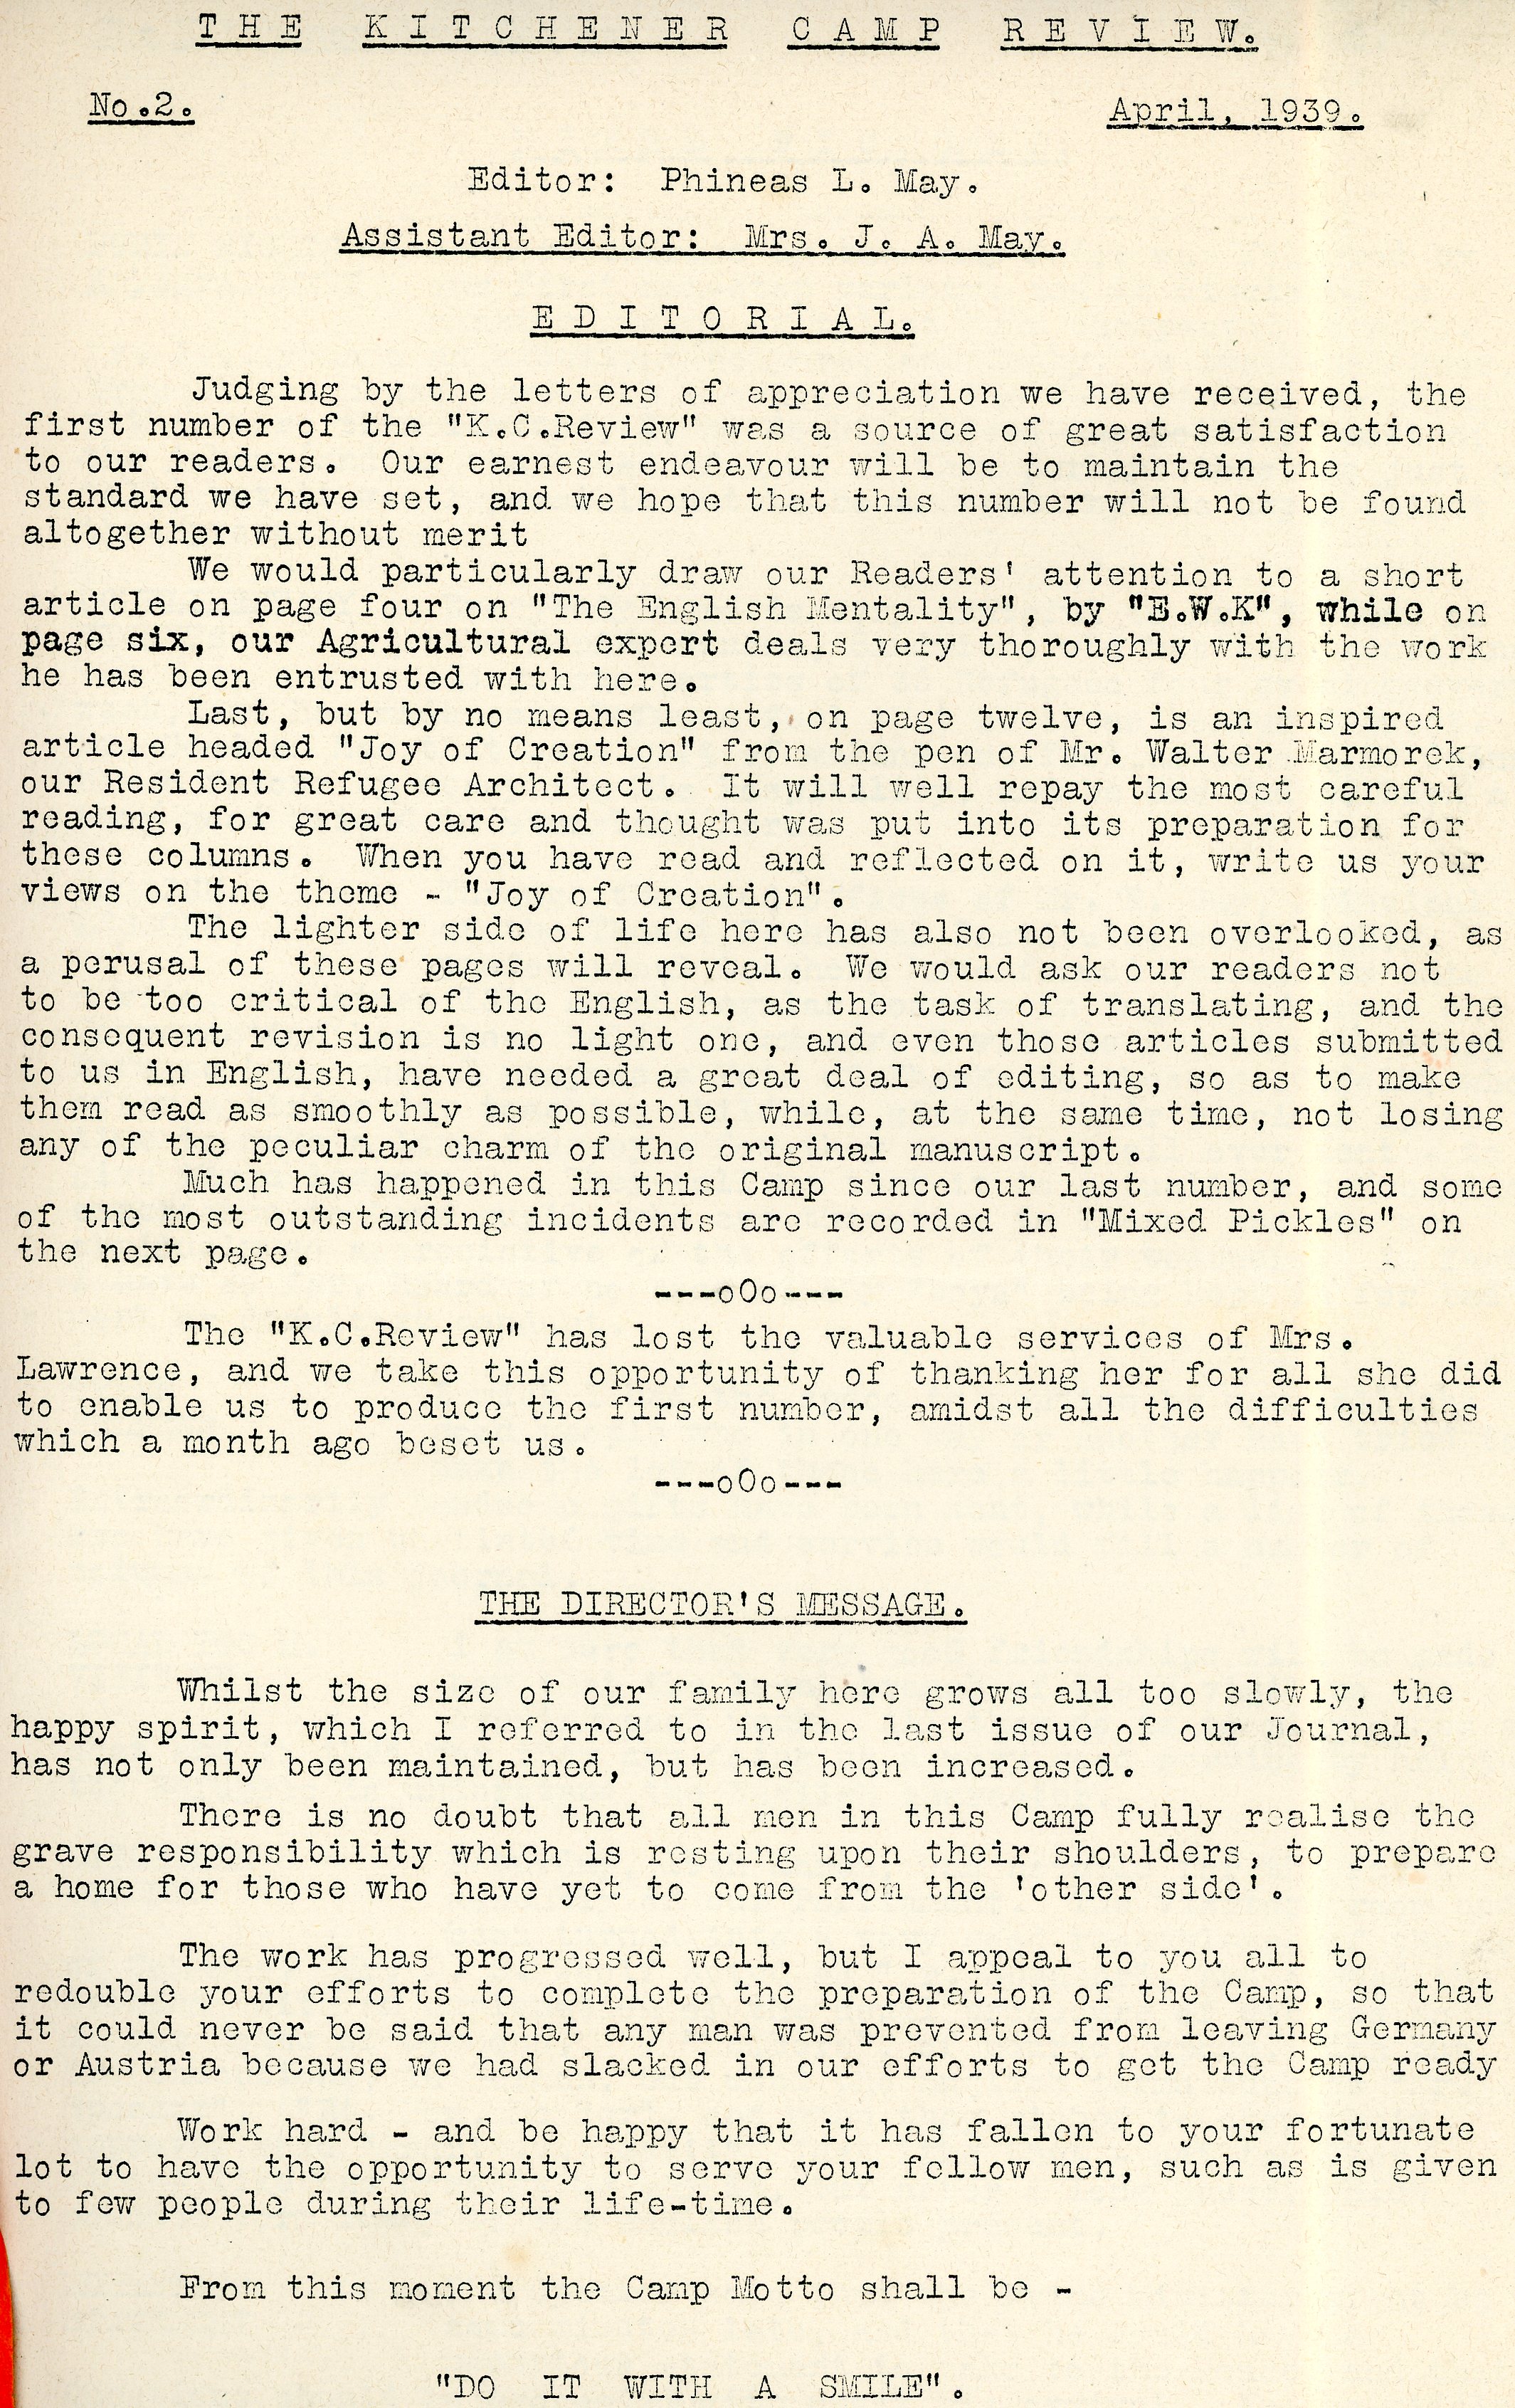 Kitchener Camp Review, April 1939, page 1